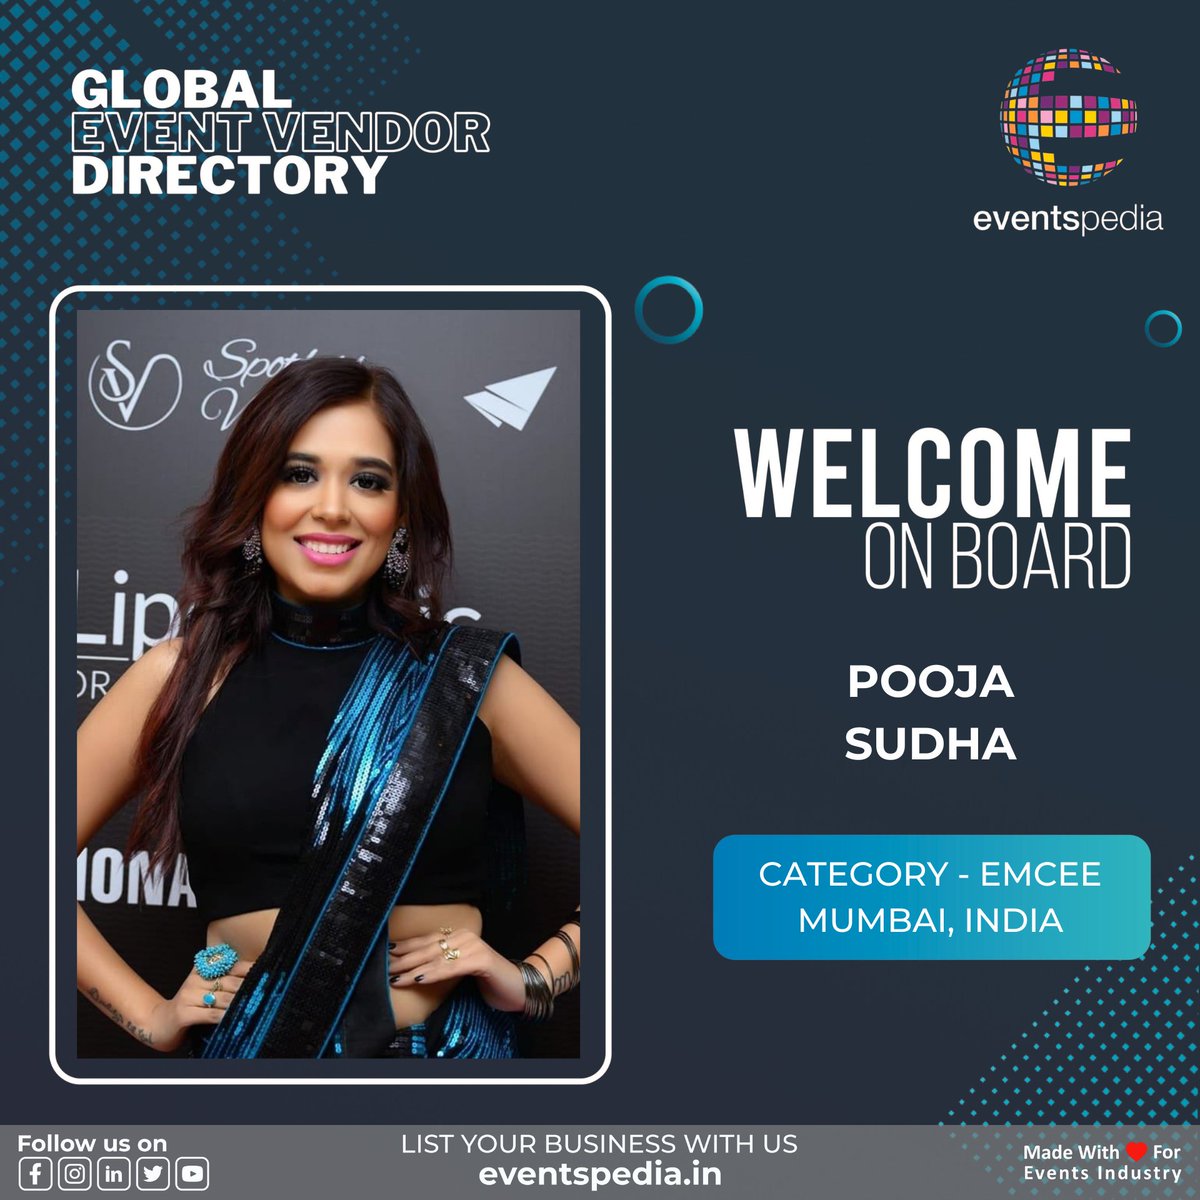 Pooja Sudha is a well known Emcee, Anchor, Showhost, Model, TV Presenter & Actress and is a well known face in the industry, both in India & Middle East. 

Click here: eventspedia.in/listing/pooja-…

#Emcee #Anchor #Showhost #eventprofs #eventspediaindia #globaleventvendor